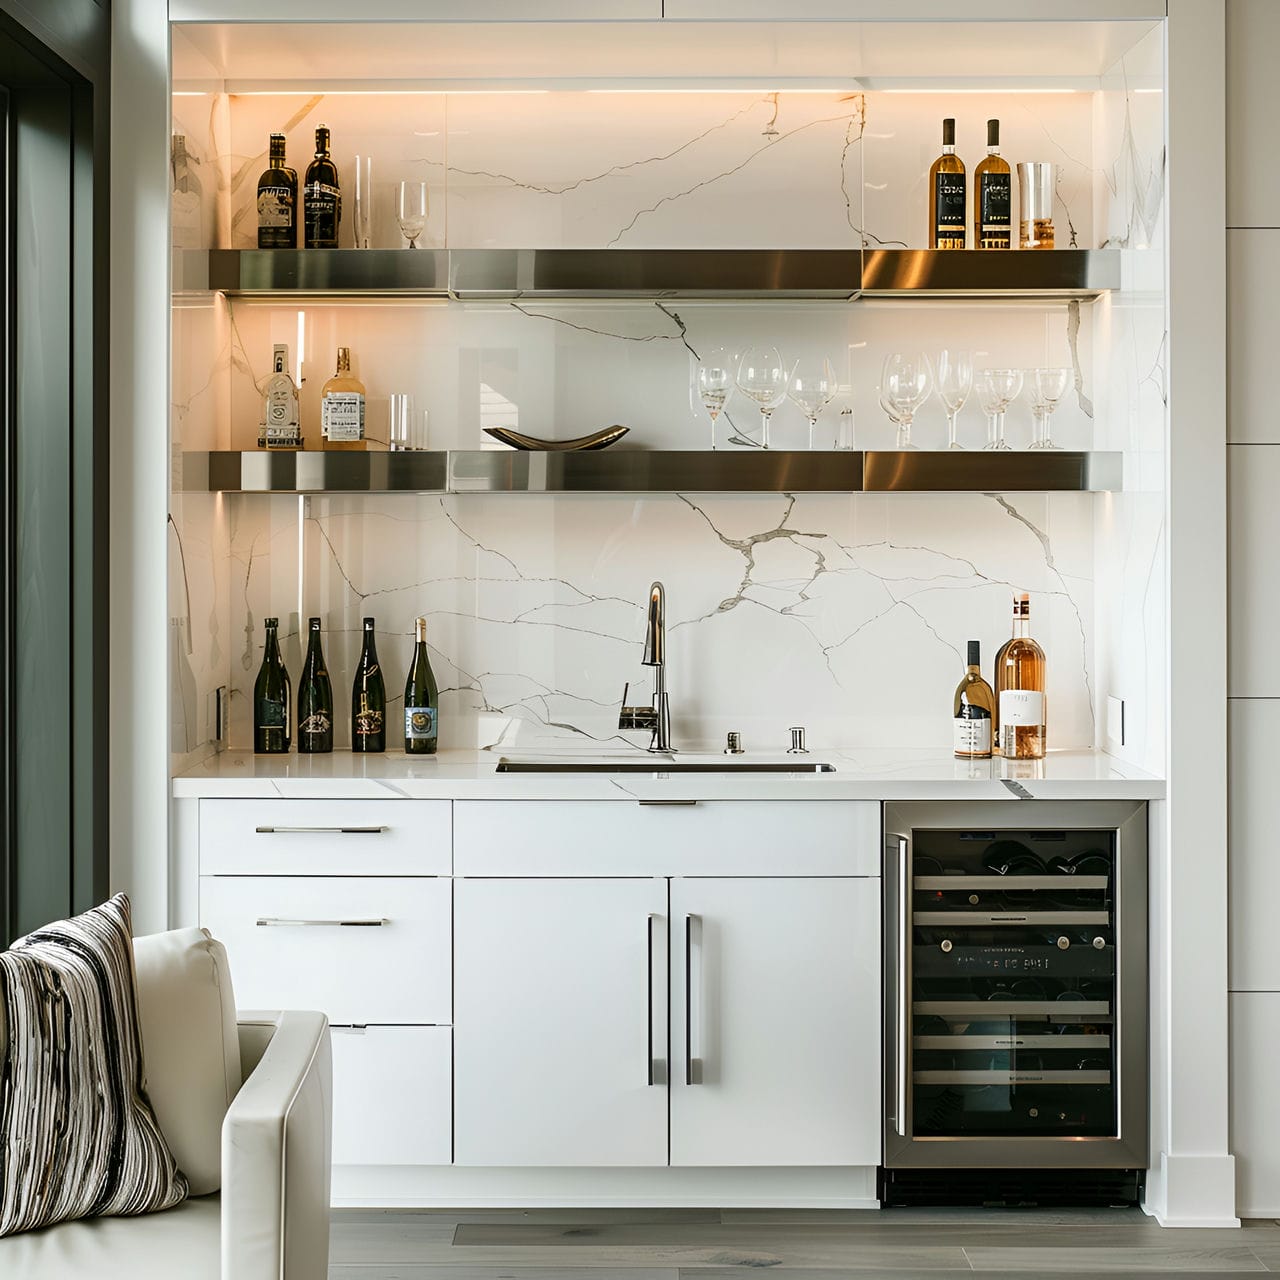 Wet bar: size, functionality, uses, furniture and renovation